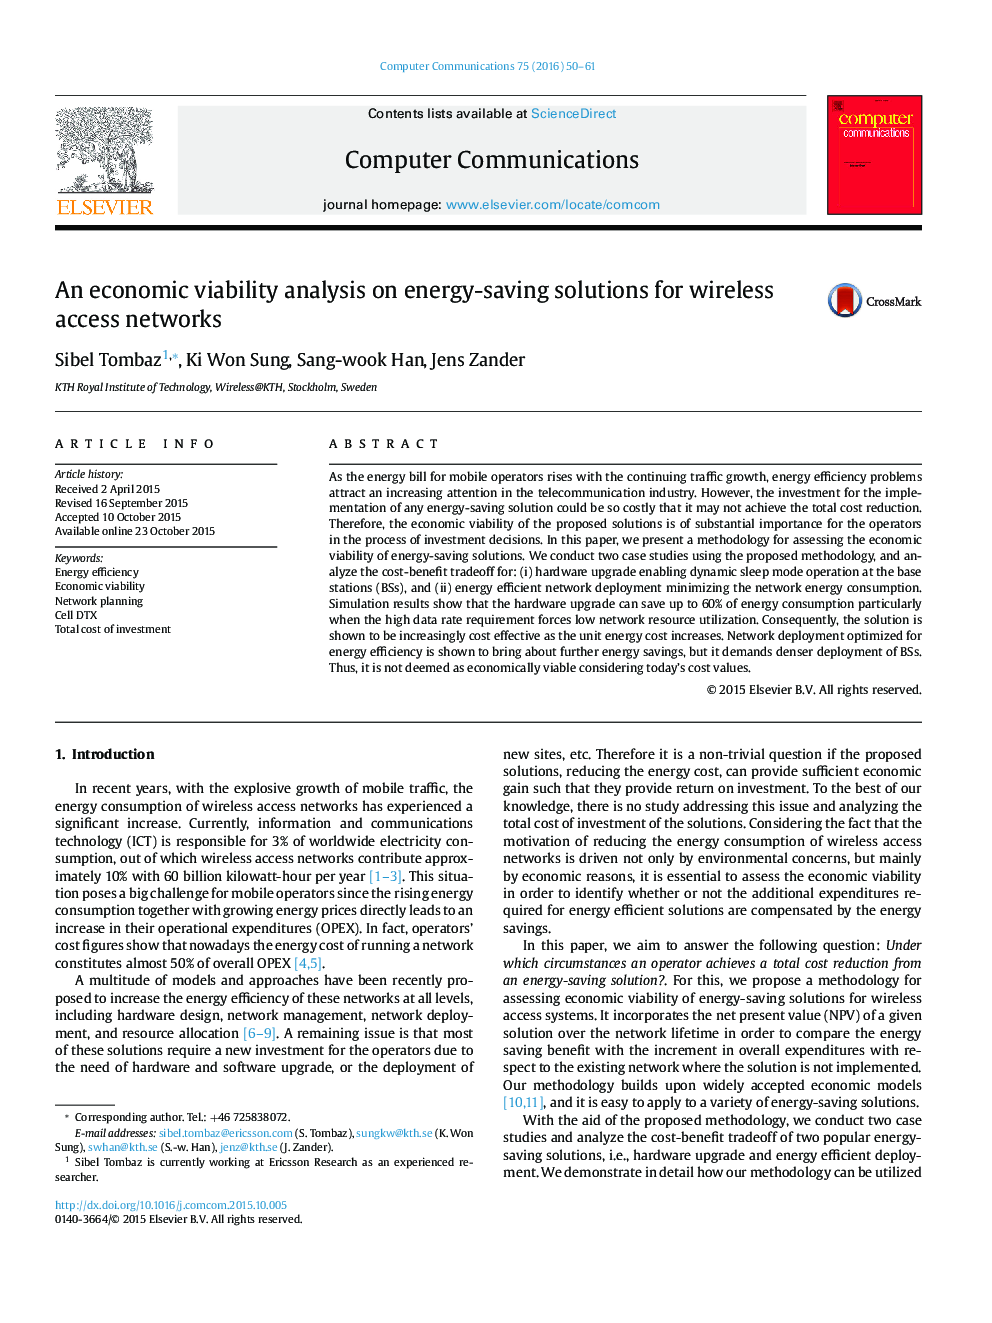 An economic viability analysis on energy-saving solutions for wireless access networks